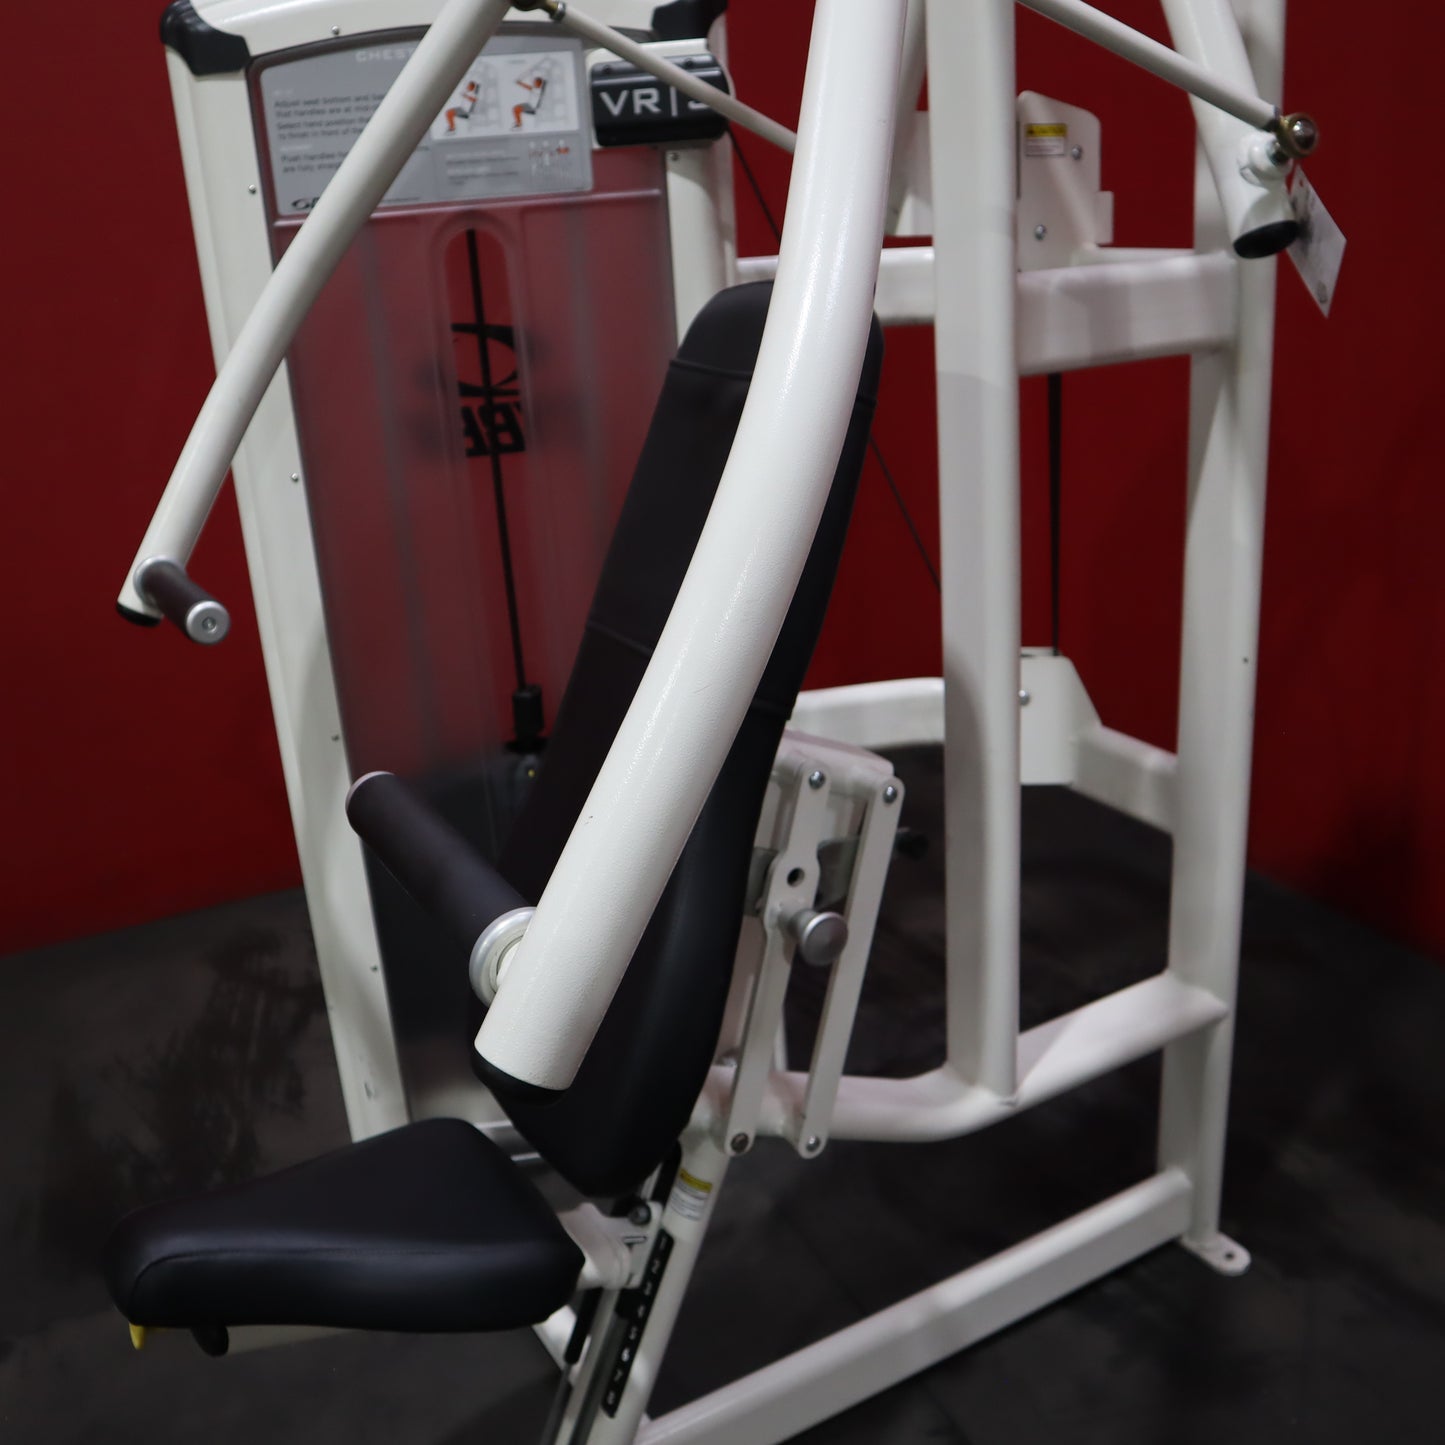 Cybex VR3 Selectorized Chest Press (Refurbished)